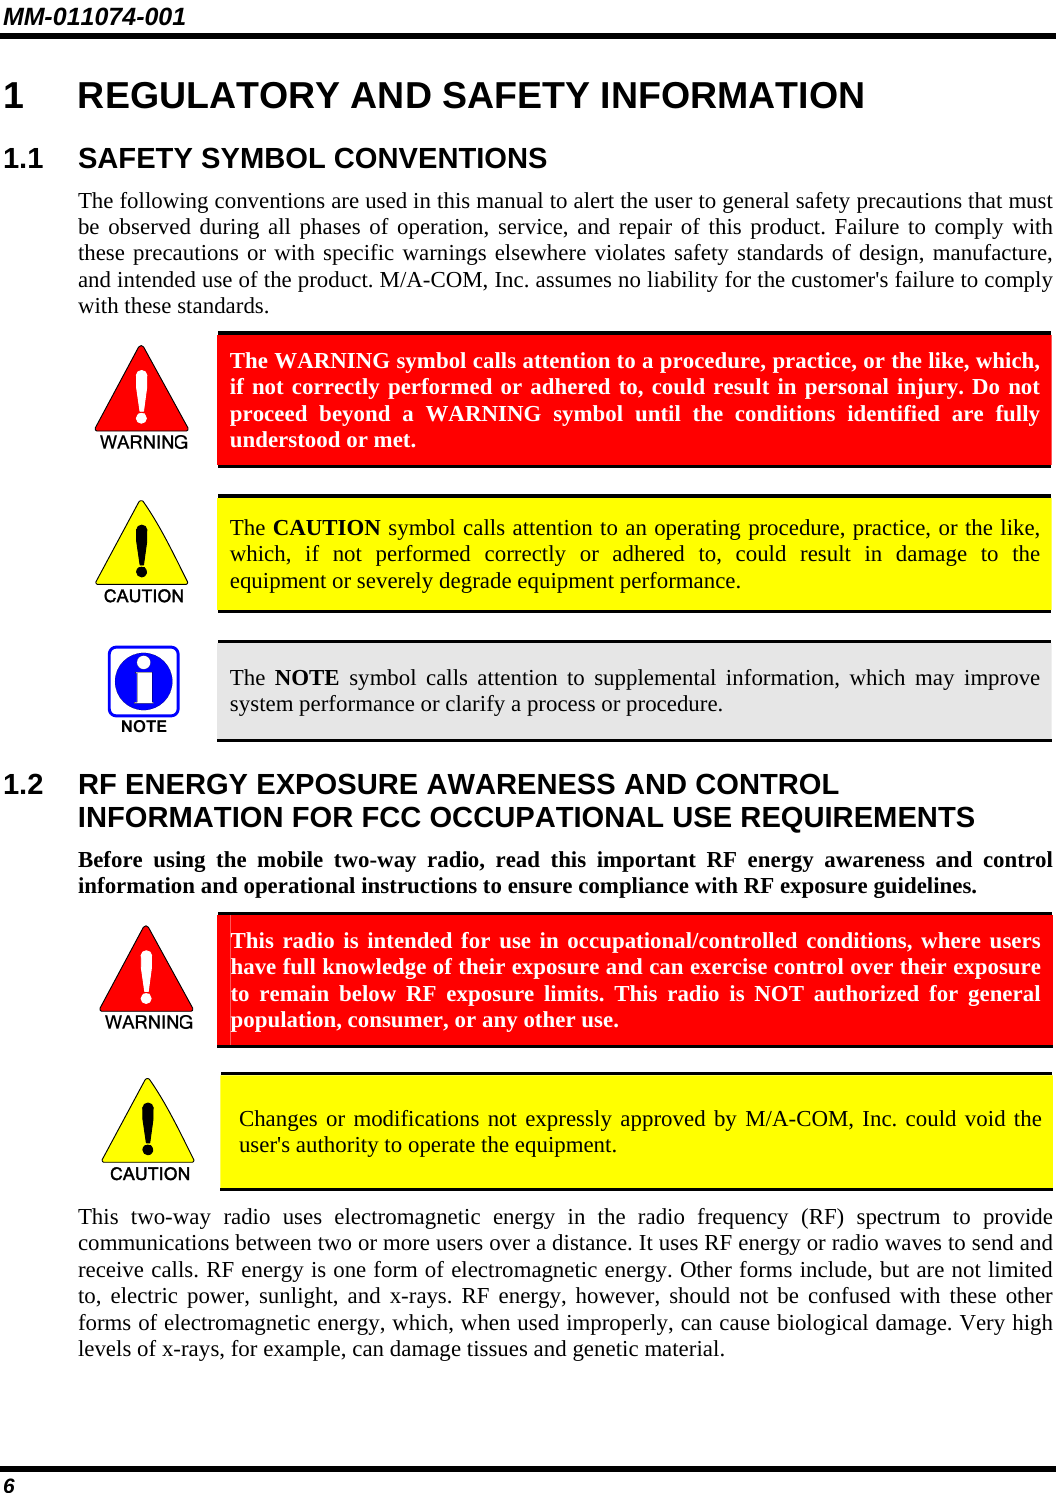 MM-011074-001 6 1  REGULATORY AND SAFETY INFORMATION 1.1 SAFETY SYMBOL CONVENTIONS The following conventions are used in this manual to alert the user to general safety precautions that must be observed during all phases of operation, service, and repair of this product. Failure to comply with these precautions or with specific warnings elsewhere violates safety standards of design, manufacture, and intended use of the product. M/A-COM, Inc. assumes no liability for the customer&apos;s failure to comply with these standards.  The WARNING symbol calls attention to a procedure, practice, or the like, which, if not correctly performed or adhered to, could result in personal injury. Do not proceed beyond a WARNING symbol until the conditions identified are fully understood or met.   CAUTION  The CAUTION symbol calls attention to an operating procedure, practice, or the like, which, if not performed correctly or adhered to, could result in damage to the equipment or severely degrade equipment performance.    The  NOTE symbol calls attention to supplemental information, which may improve system performance or clarify a process or procedure. 1.2  RF ENERGY EXPOSURE AWARENESS AND CONTROL INFORMATION FOR FCC OCCUPATIONAL USE REQUIREMENTS Before using the mobile two-way radio, read this important RF energy awareness and control information and operational instructions to ensure compliance with RF exposure guidelines.  This radio is intended for use in occupational/controlled conditions, where users have full knowledge of their exposure and can exercise control over their exposure to remain below RF exposure limits. This radio is NOT authorized for general population, consumer, or any other use.  CAUTION  Changes or modifications not expressly approved by M/A-COM, Inc. could void the user&apos;s authority to operate the equipment. This two-way radio uses electromagnetic energy in the radio frequency (RF) spectrum to provide communications between two or more users over a distance. It uses RF energy or radio waves to send and receive calls. RF energy is one form of electromagnetic energy. Other forms include, but are not limited to, electric power, sunlight, and x-rays. RF energy, however, should not be confused with these other forms of electromagnetic energy, which, when used improperly, can cause biological damage. Very high levels of x-rays, for example, can damage tissues and genetic material. 